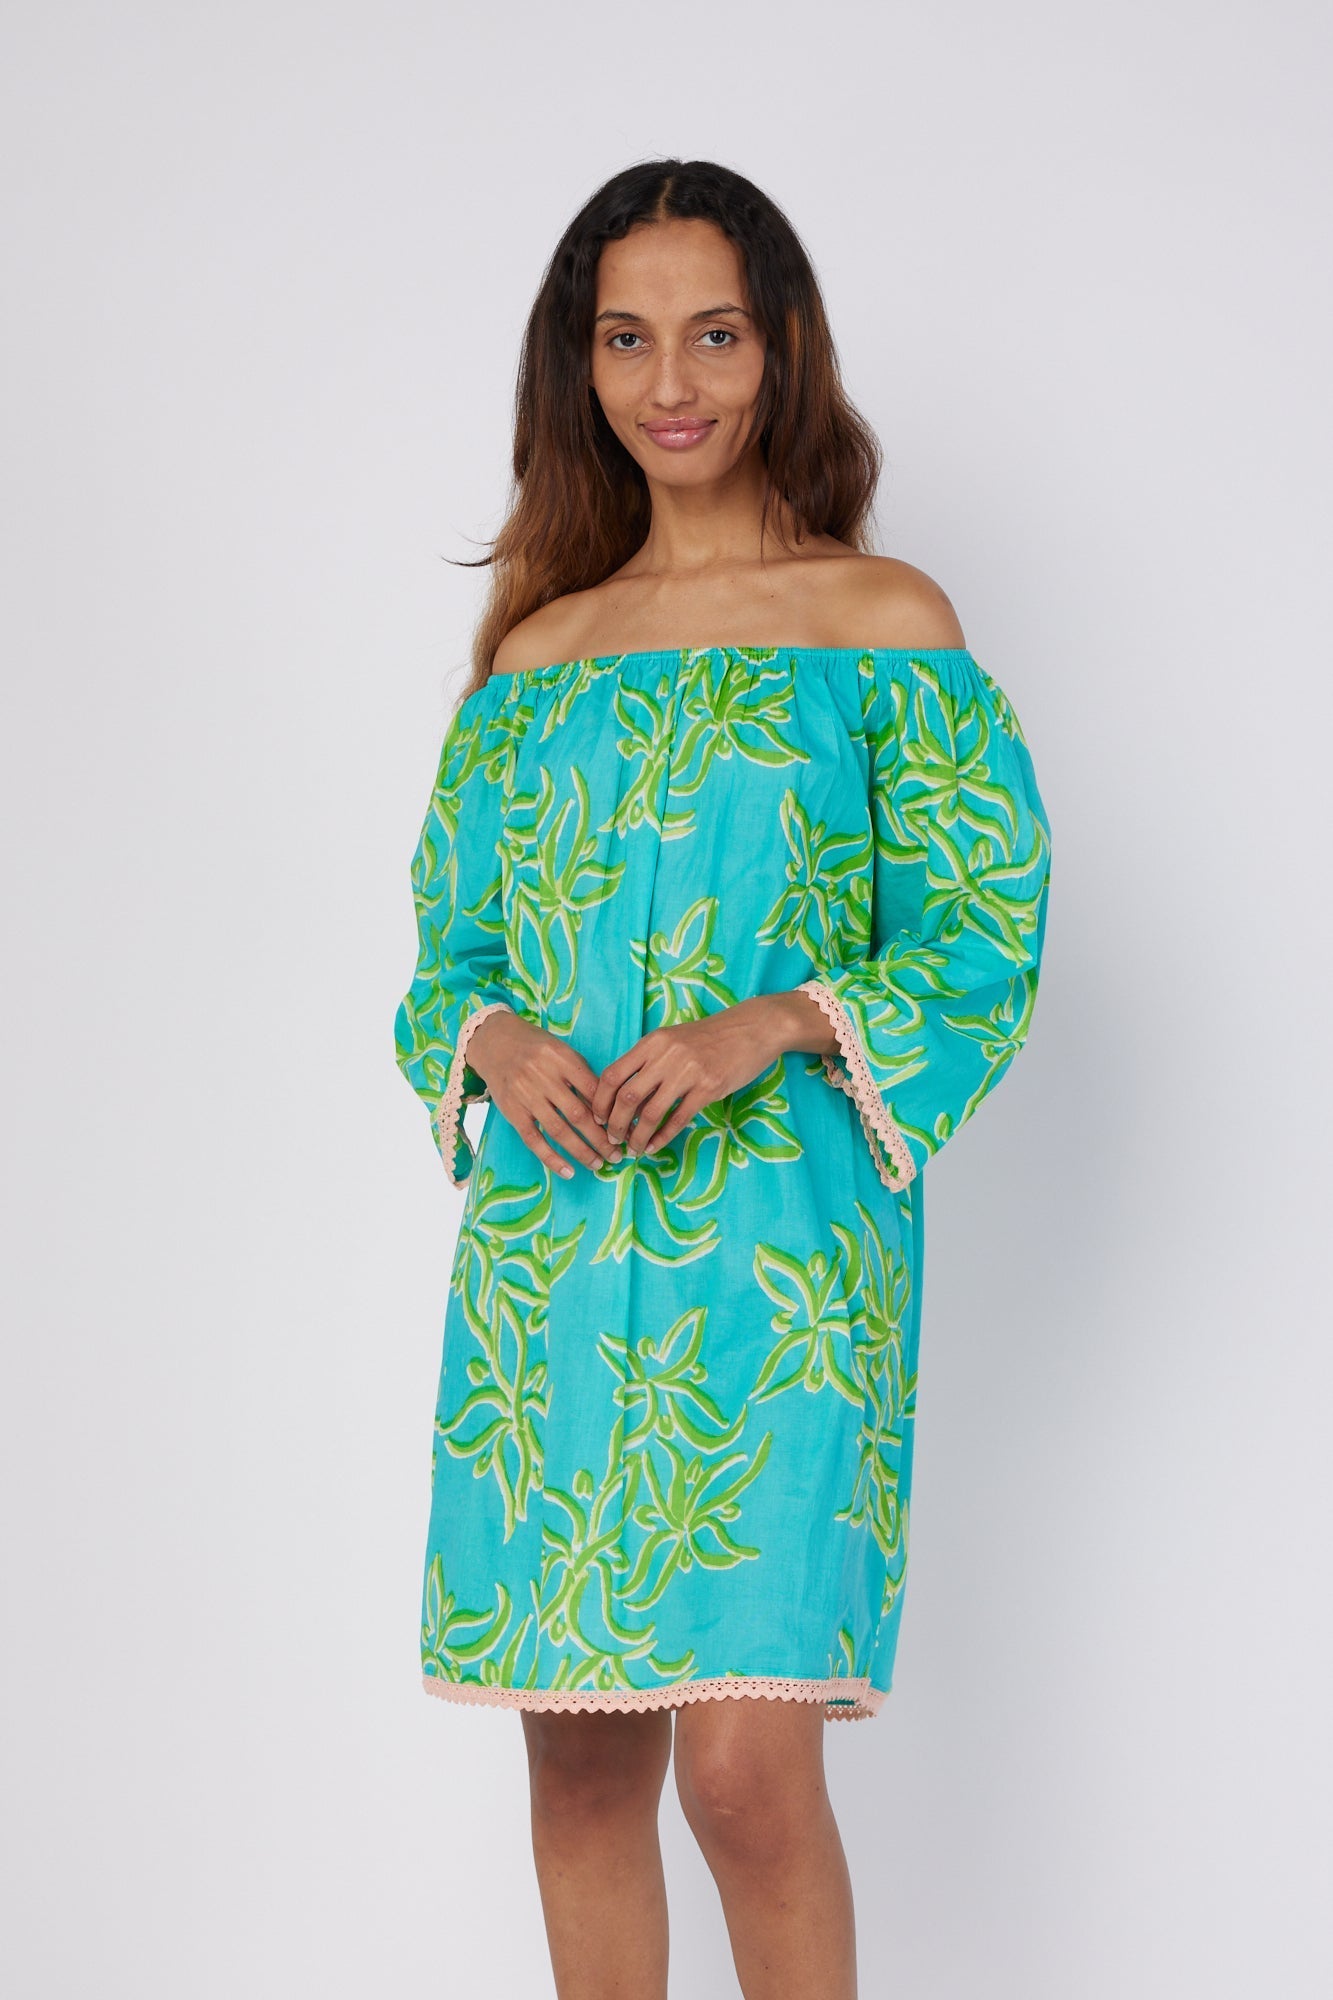 ModaPosa Alessandra Off The Shoulder Knee Length Dress in Green Abstract Flower . Discover women's resort dresses and lifestyle clothing inspired by the Mediterranean. Free worldwide shipping available!